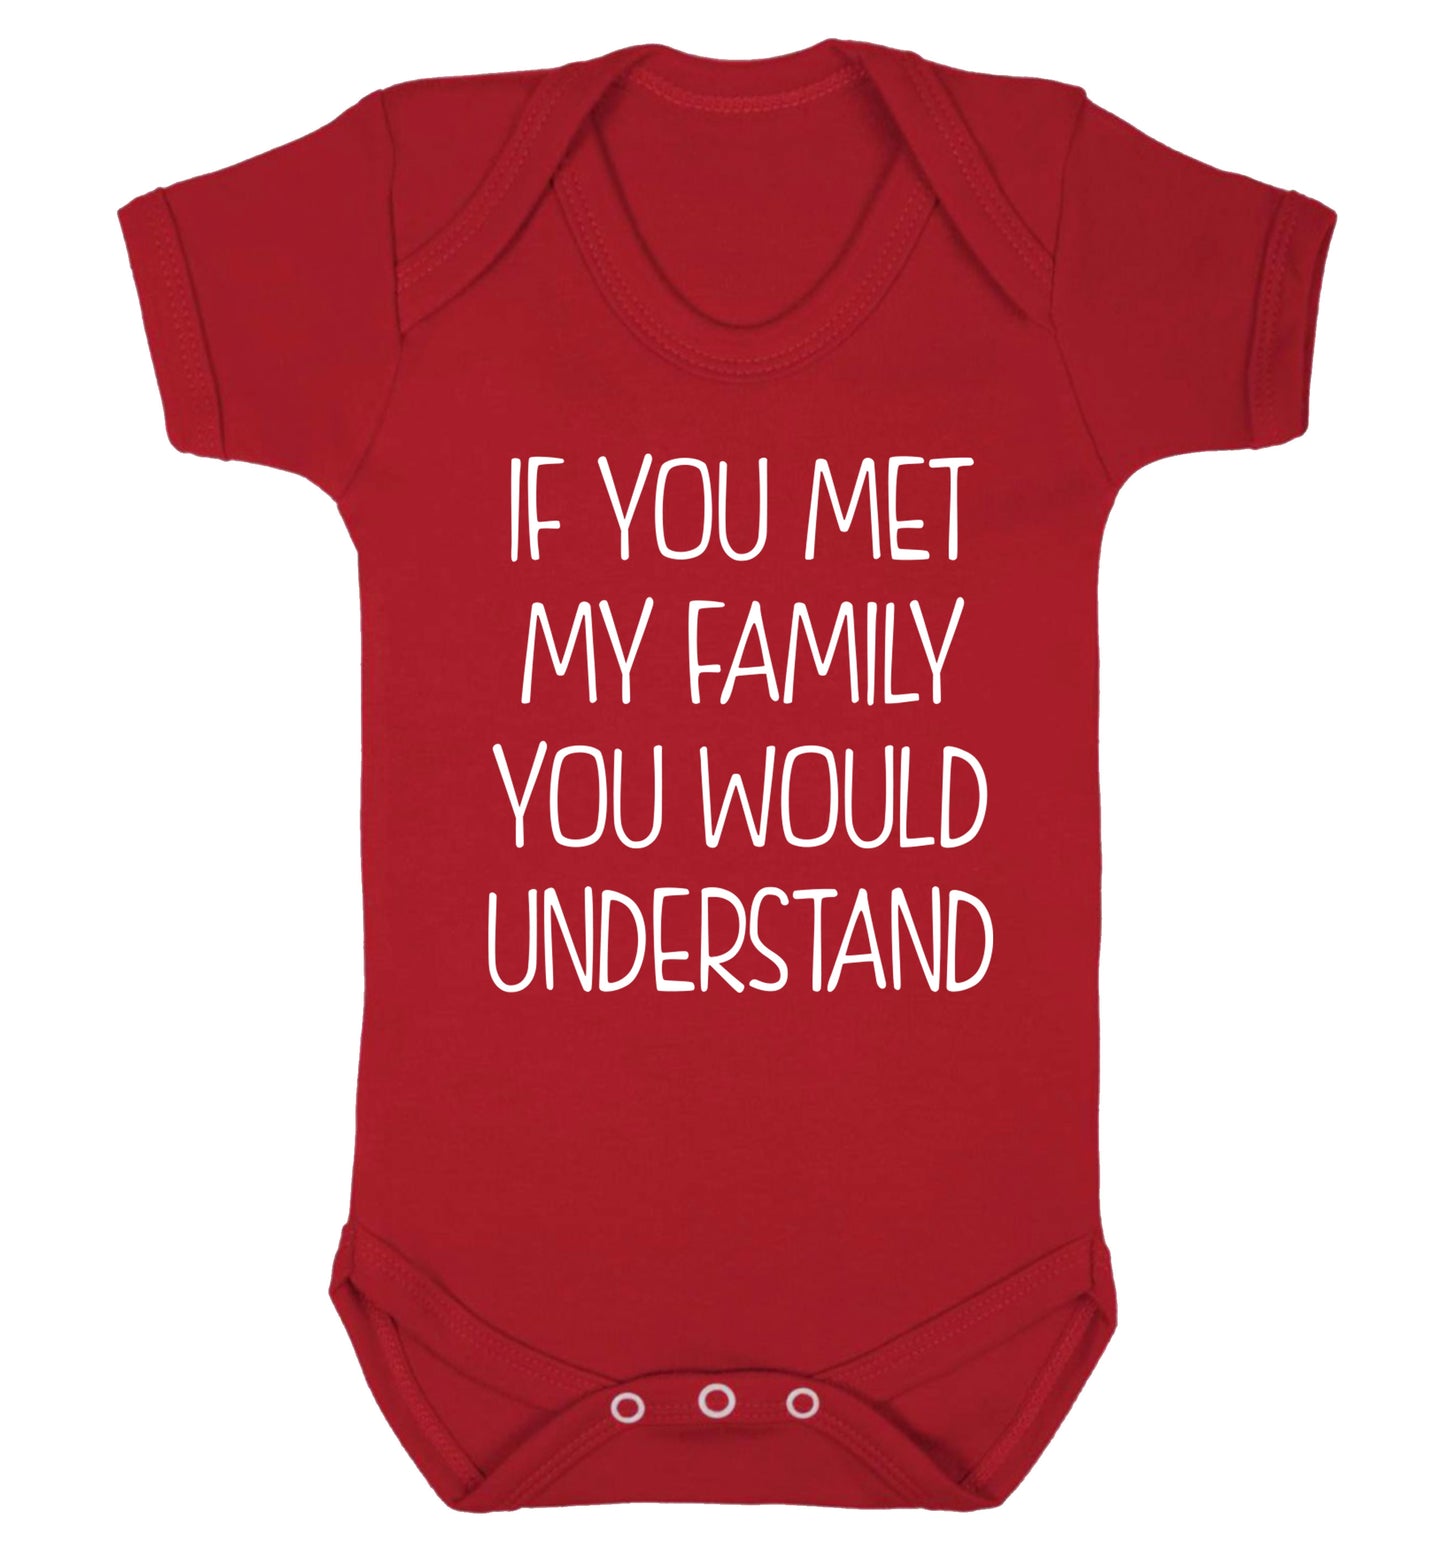 If you met my family you would understand Baby Vest red 18-24 months